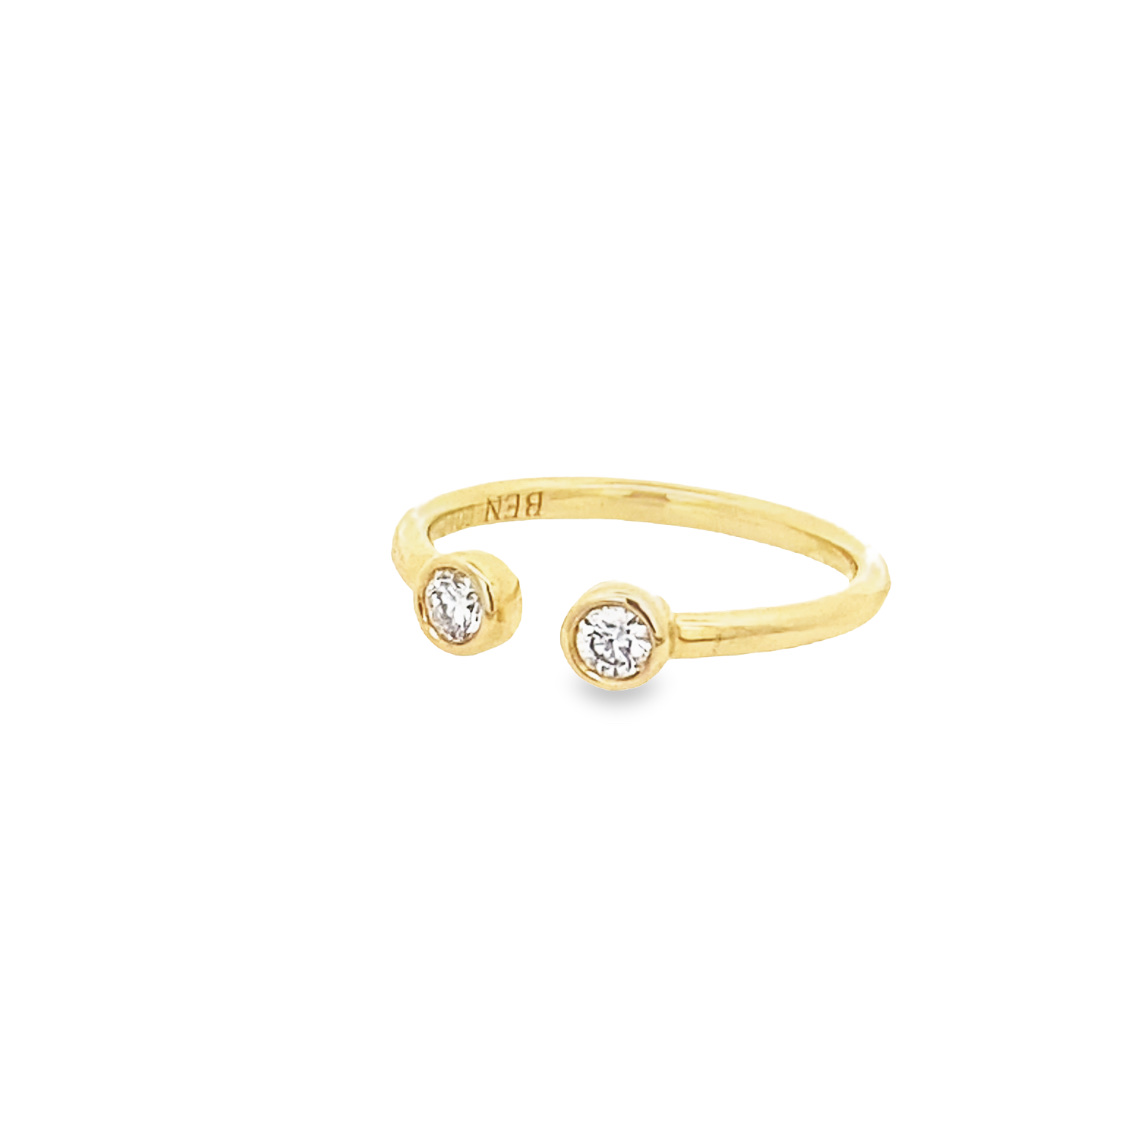 14 Karat Yellow Gold Open Diamond Ring Having 2 Full Cut Bezel Set Diamonds With A Combined Weight Of .18 Carat And Graded G-H For Color And SI2-I1 For Clarity